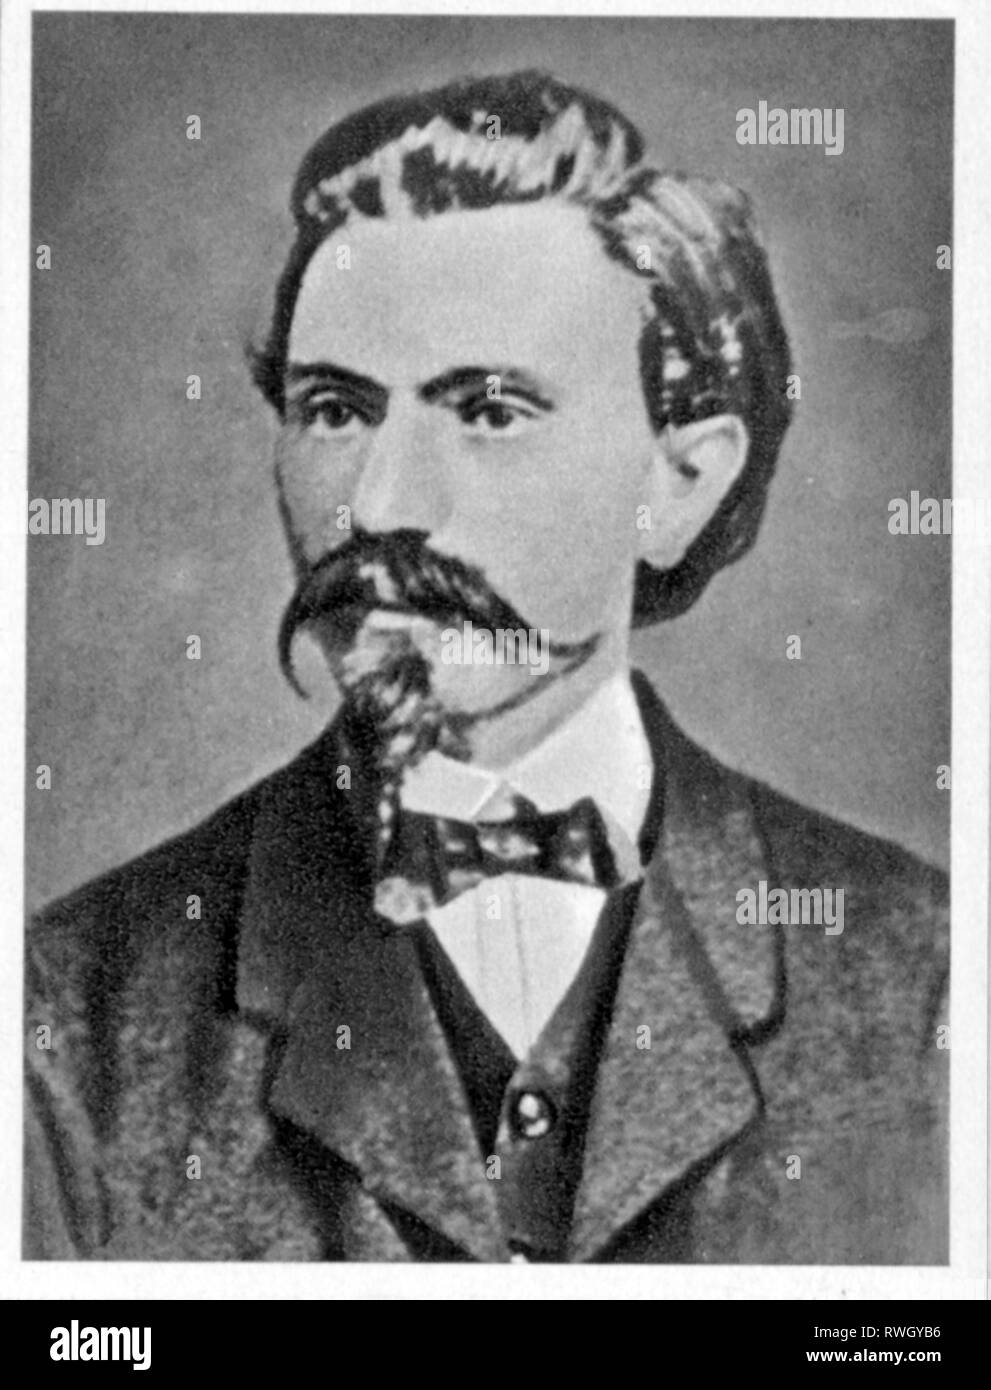 Bebel, August, 22.2.1840 - 13.8.1913, German politician and publicist, Member of the North German Reichstag 1867 - 1871, portrait, circa 1865, Additional-Rights-Clearance-Info-Not-Available Stock Photo